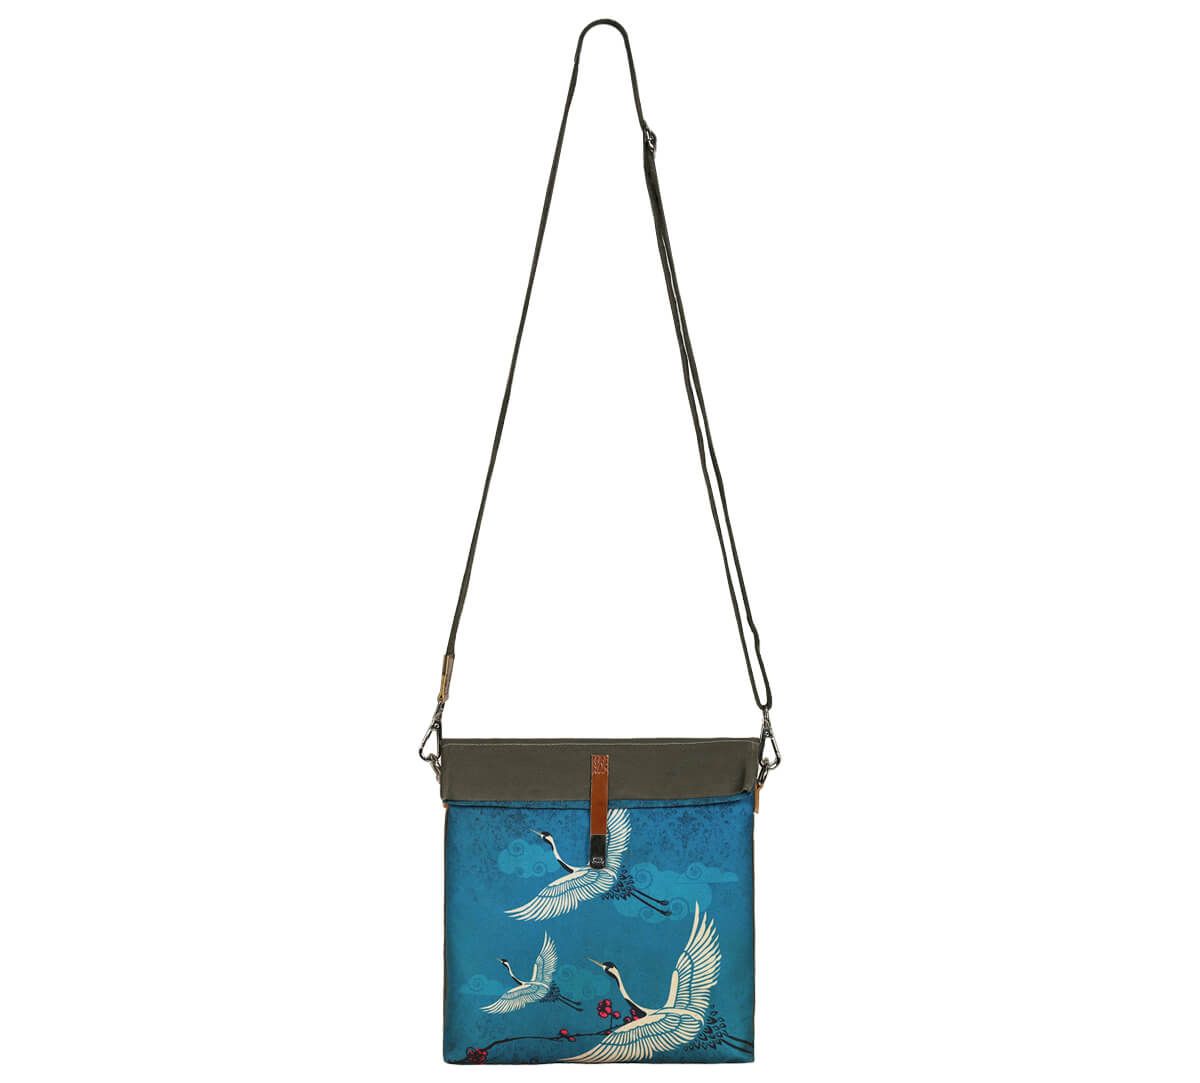 India Circus by Krsnaa Mehta Legend of the Cranes Sling Bag